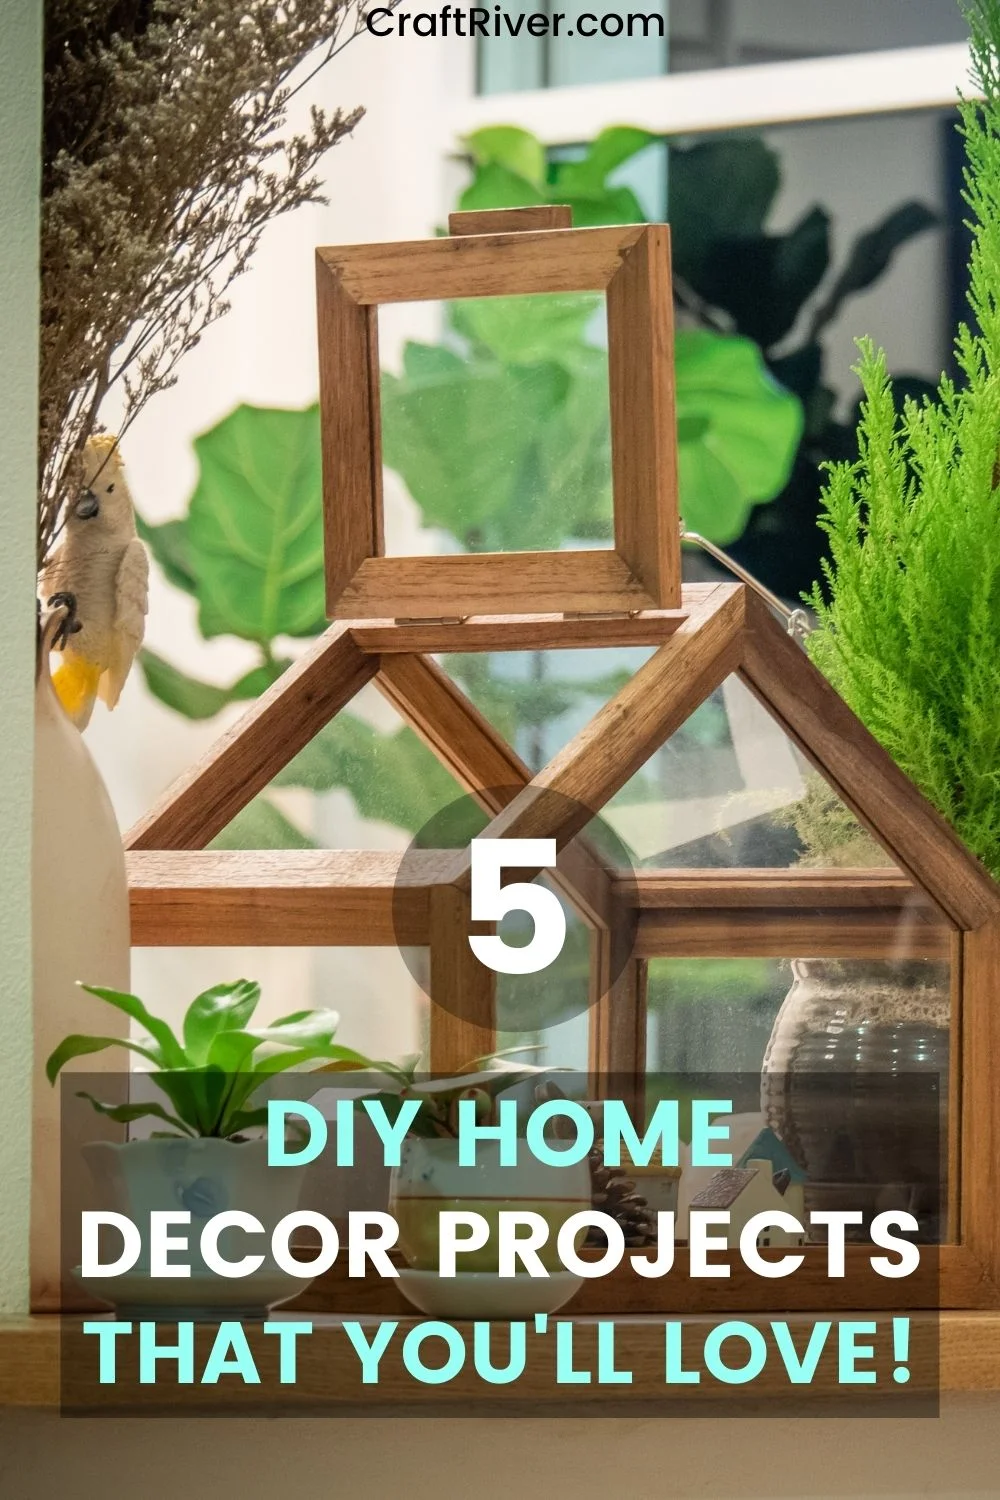 5 DIY Home Decor Projects